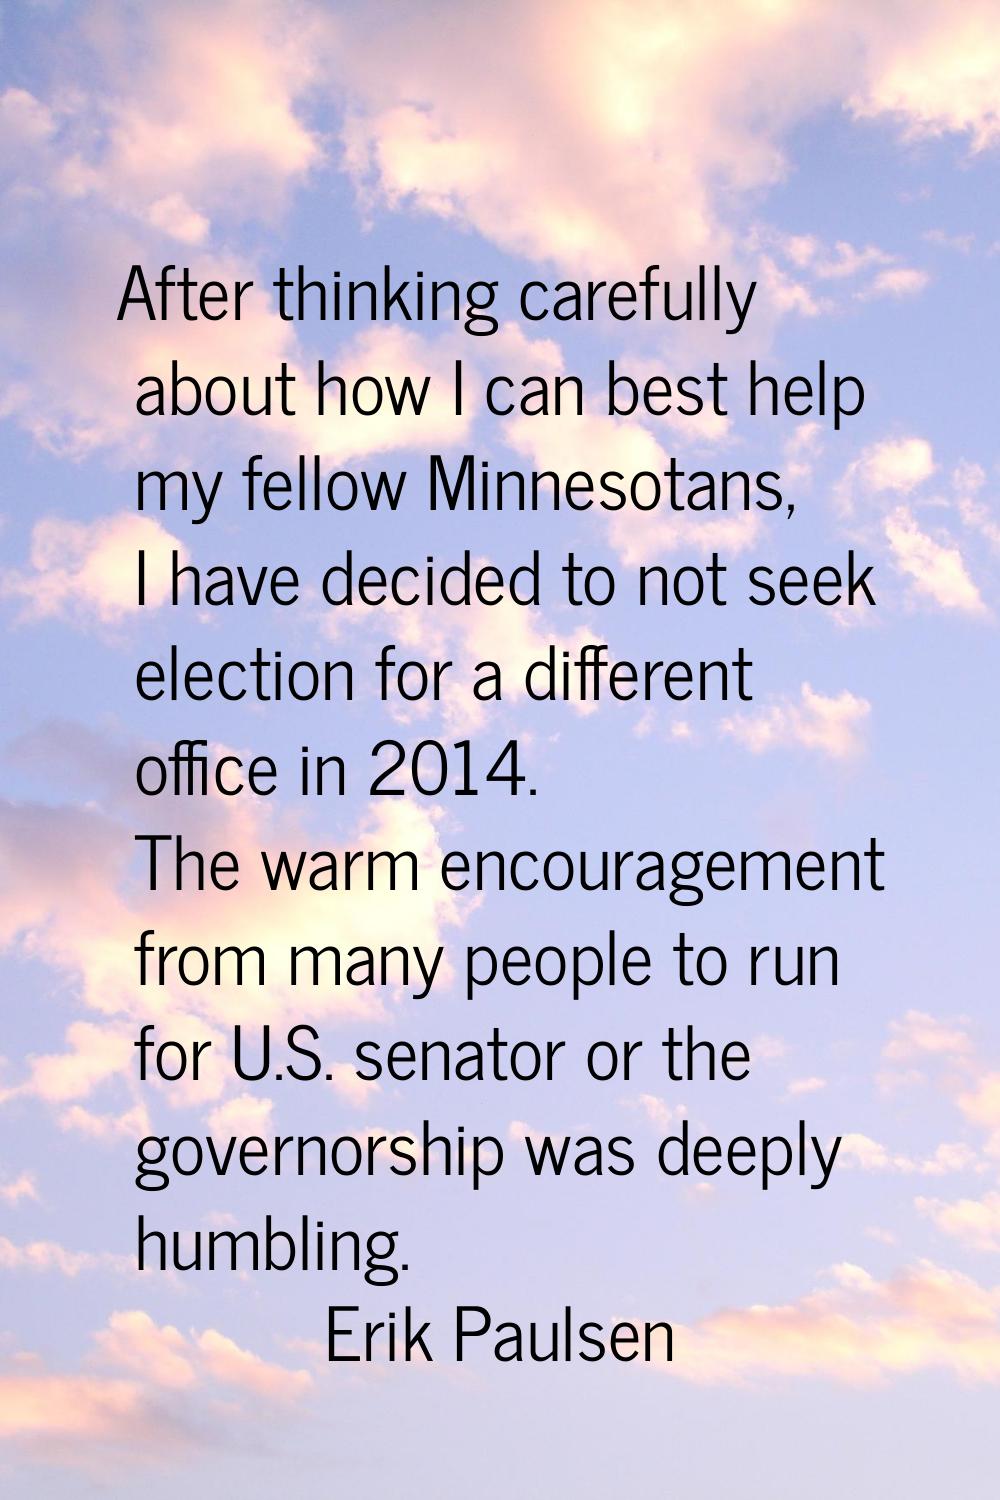 After thinking carefully about how I can best help my fellow Minnesotans, I have decided to not see